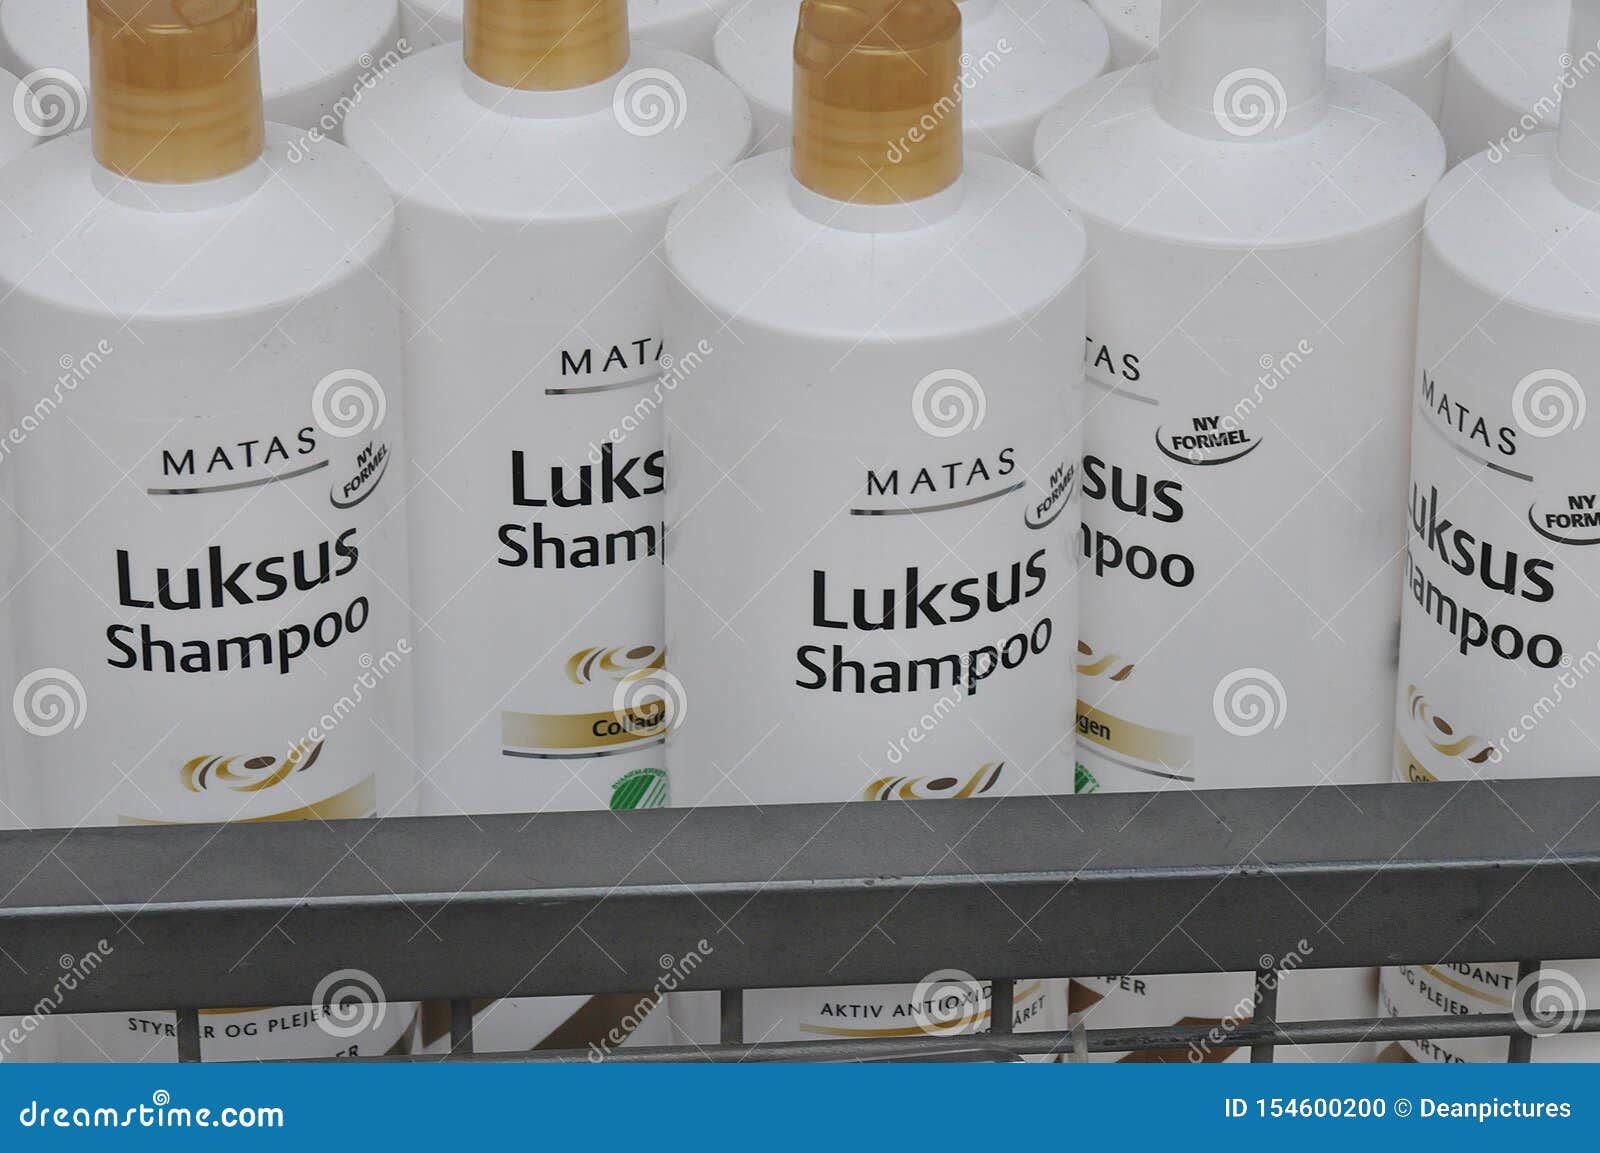 Luksus Shampoo Stock Photos - Royalty-Free Stock from Dreamstime